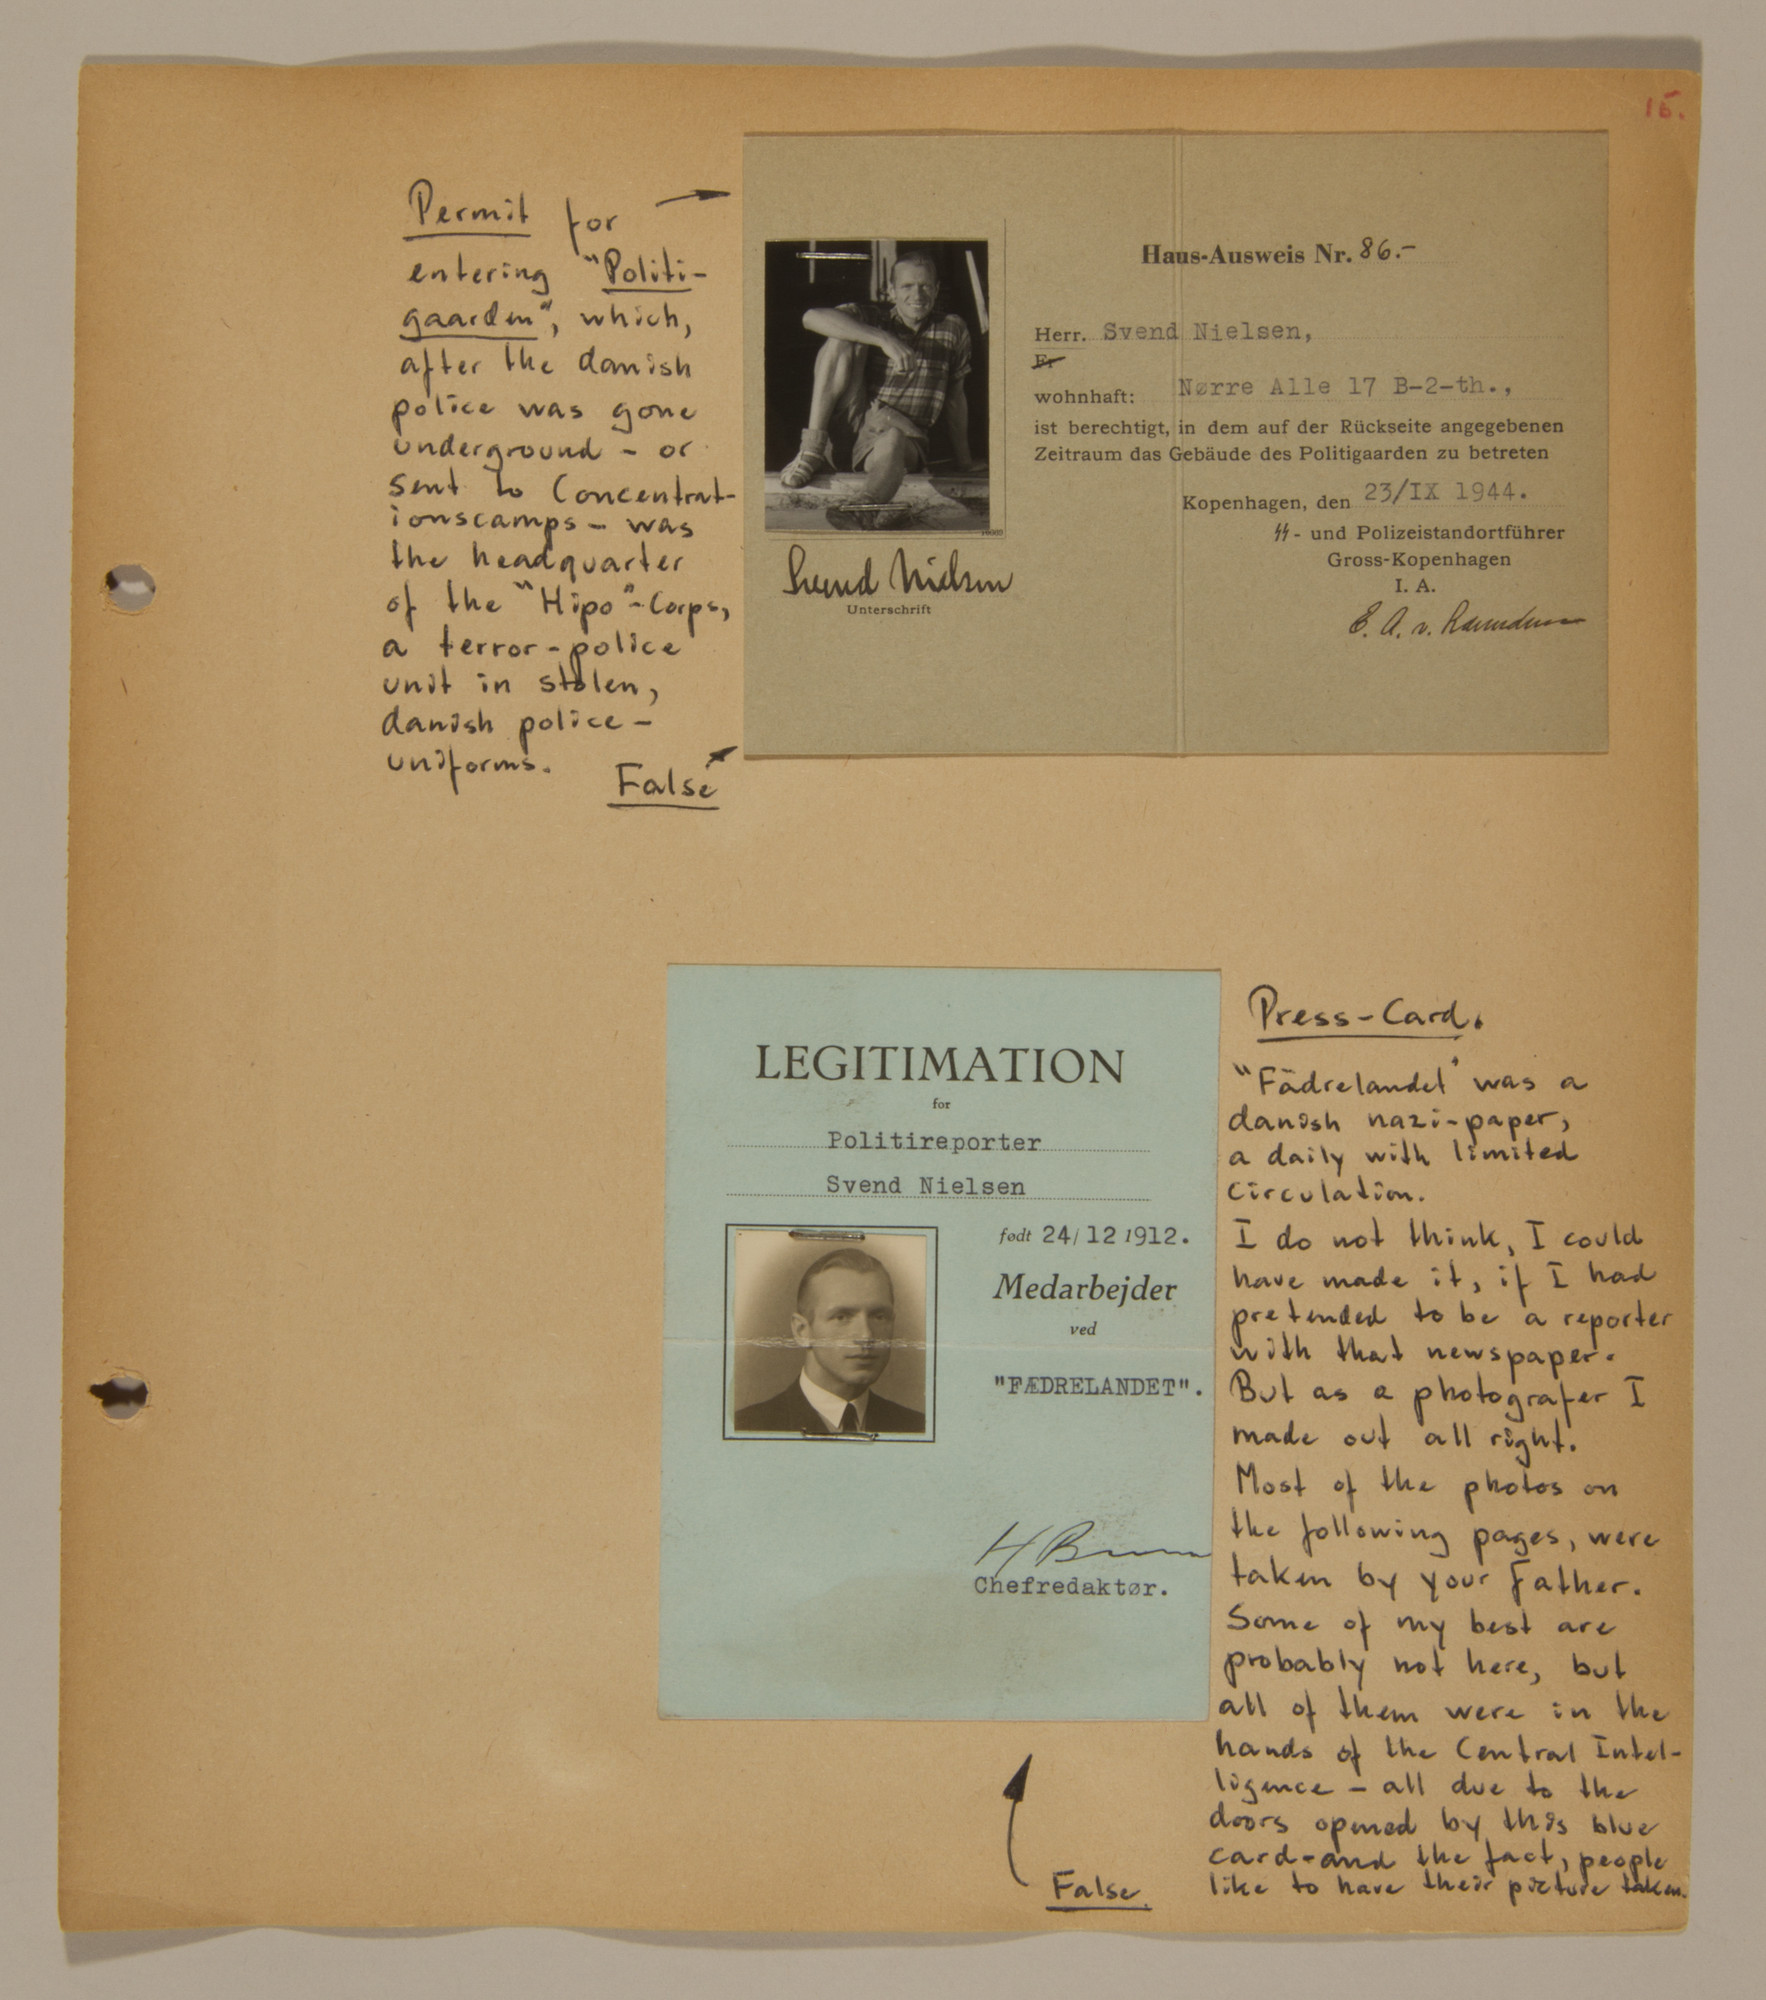 Page from volume three of a set of scrapbooks compiled by Bjorn Sibbern, a Danish policeman and resistance member, documenting the German occupation of Denmark.

This page contains Bjorn Sibbern's (aka Svend Nieslsen's) false press card and permit to enter the headquarters of the secret police.